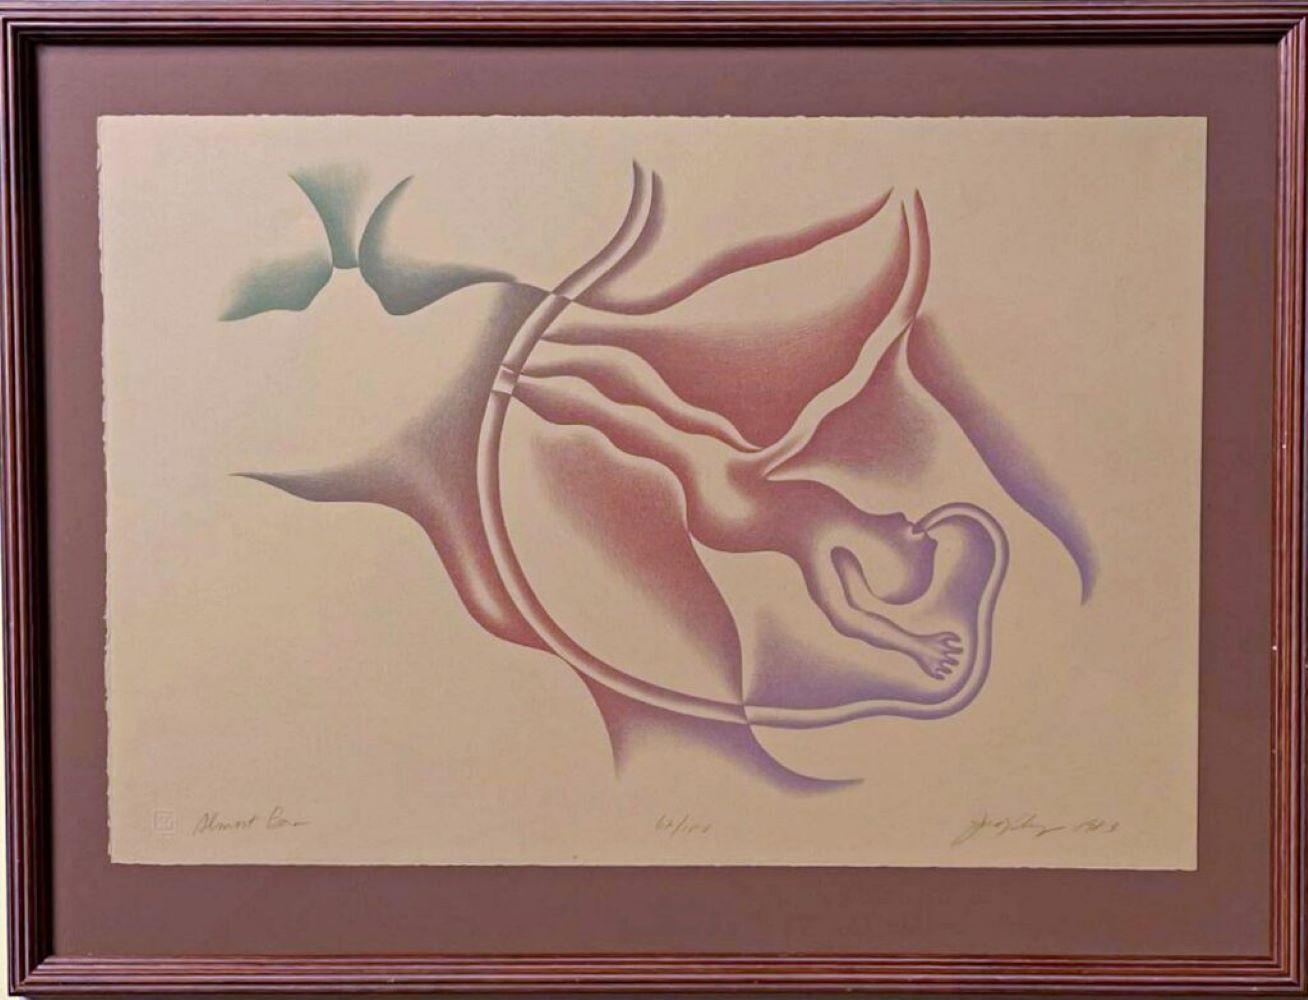 Almost Born (early signed/n lithograph by world renowned feminist artist)  - Print by Judy Chicago